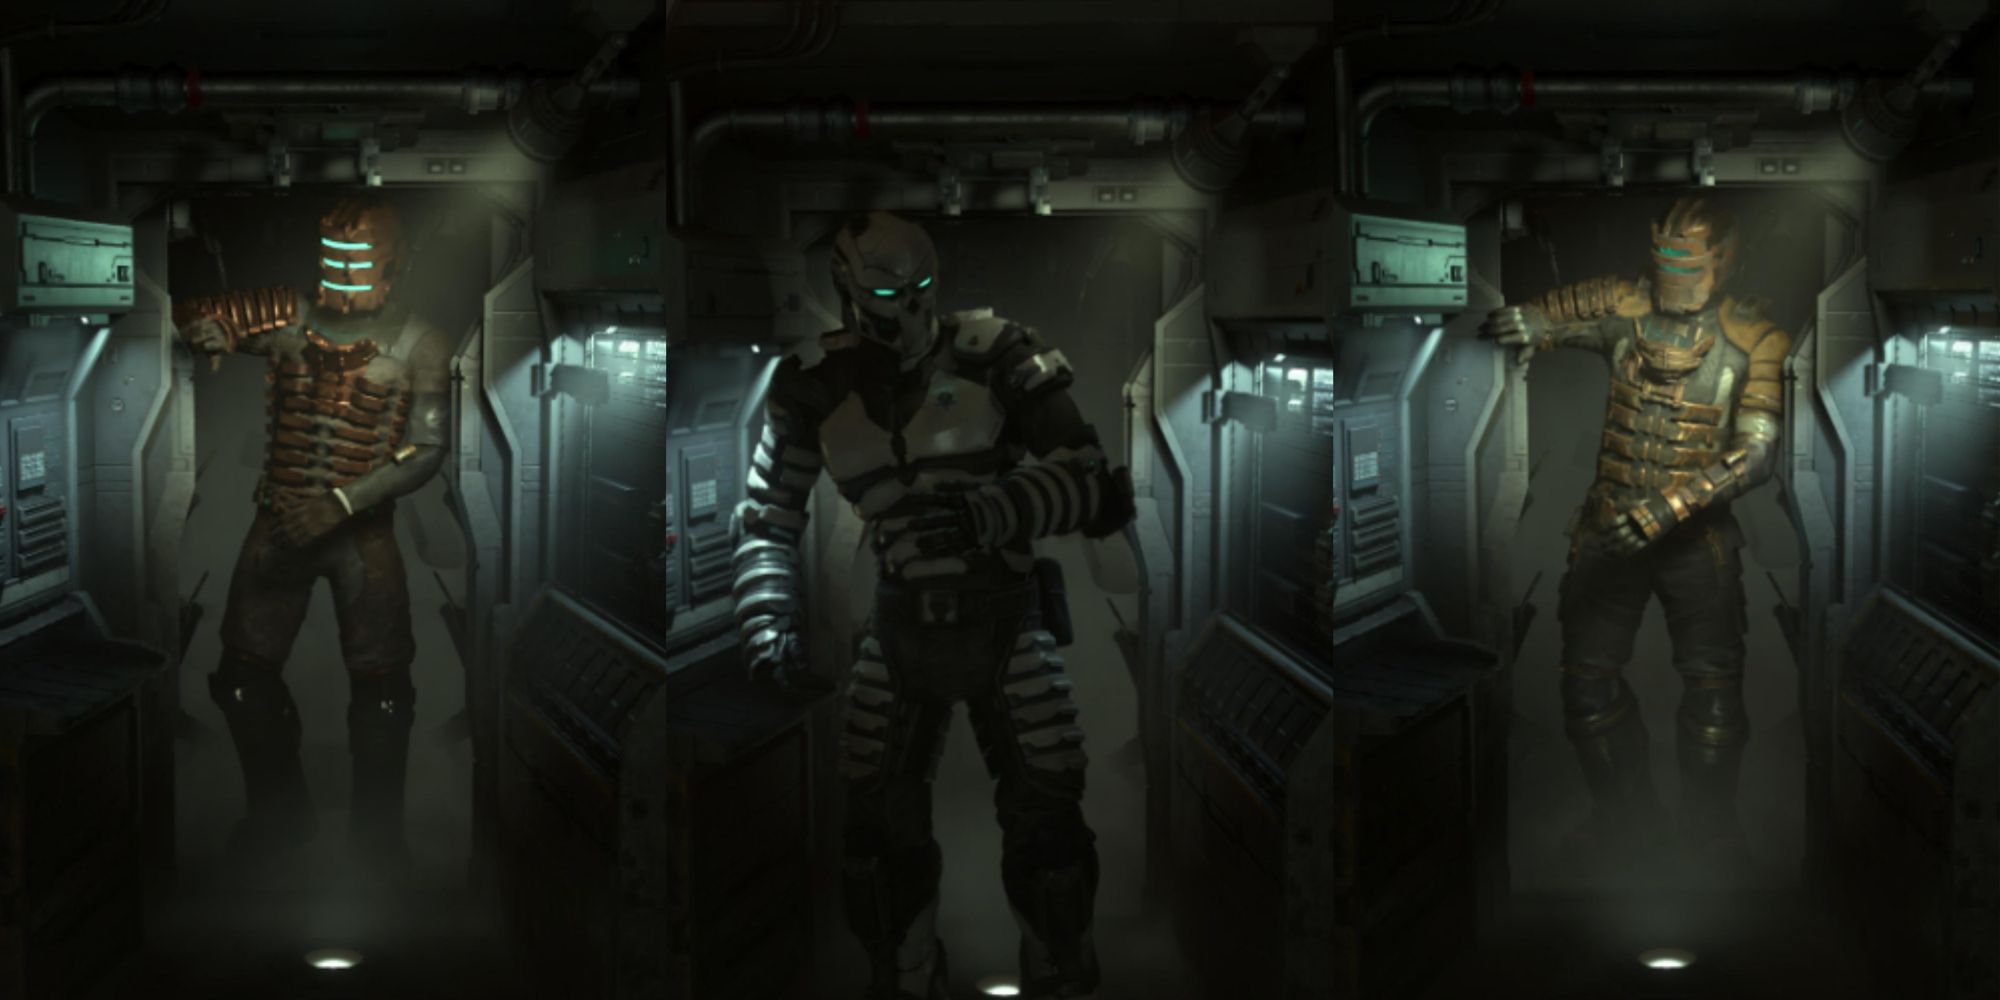 Every Dead Space suit with DS-08, level 6, and level 2